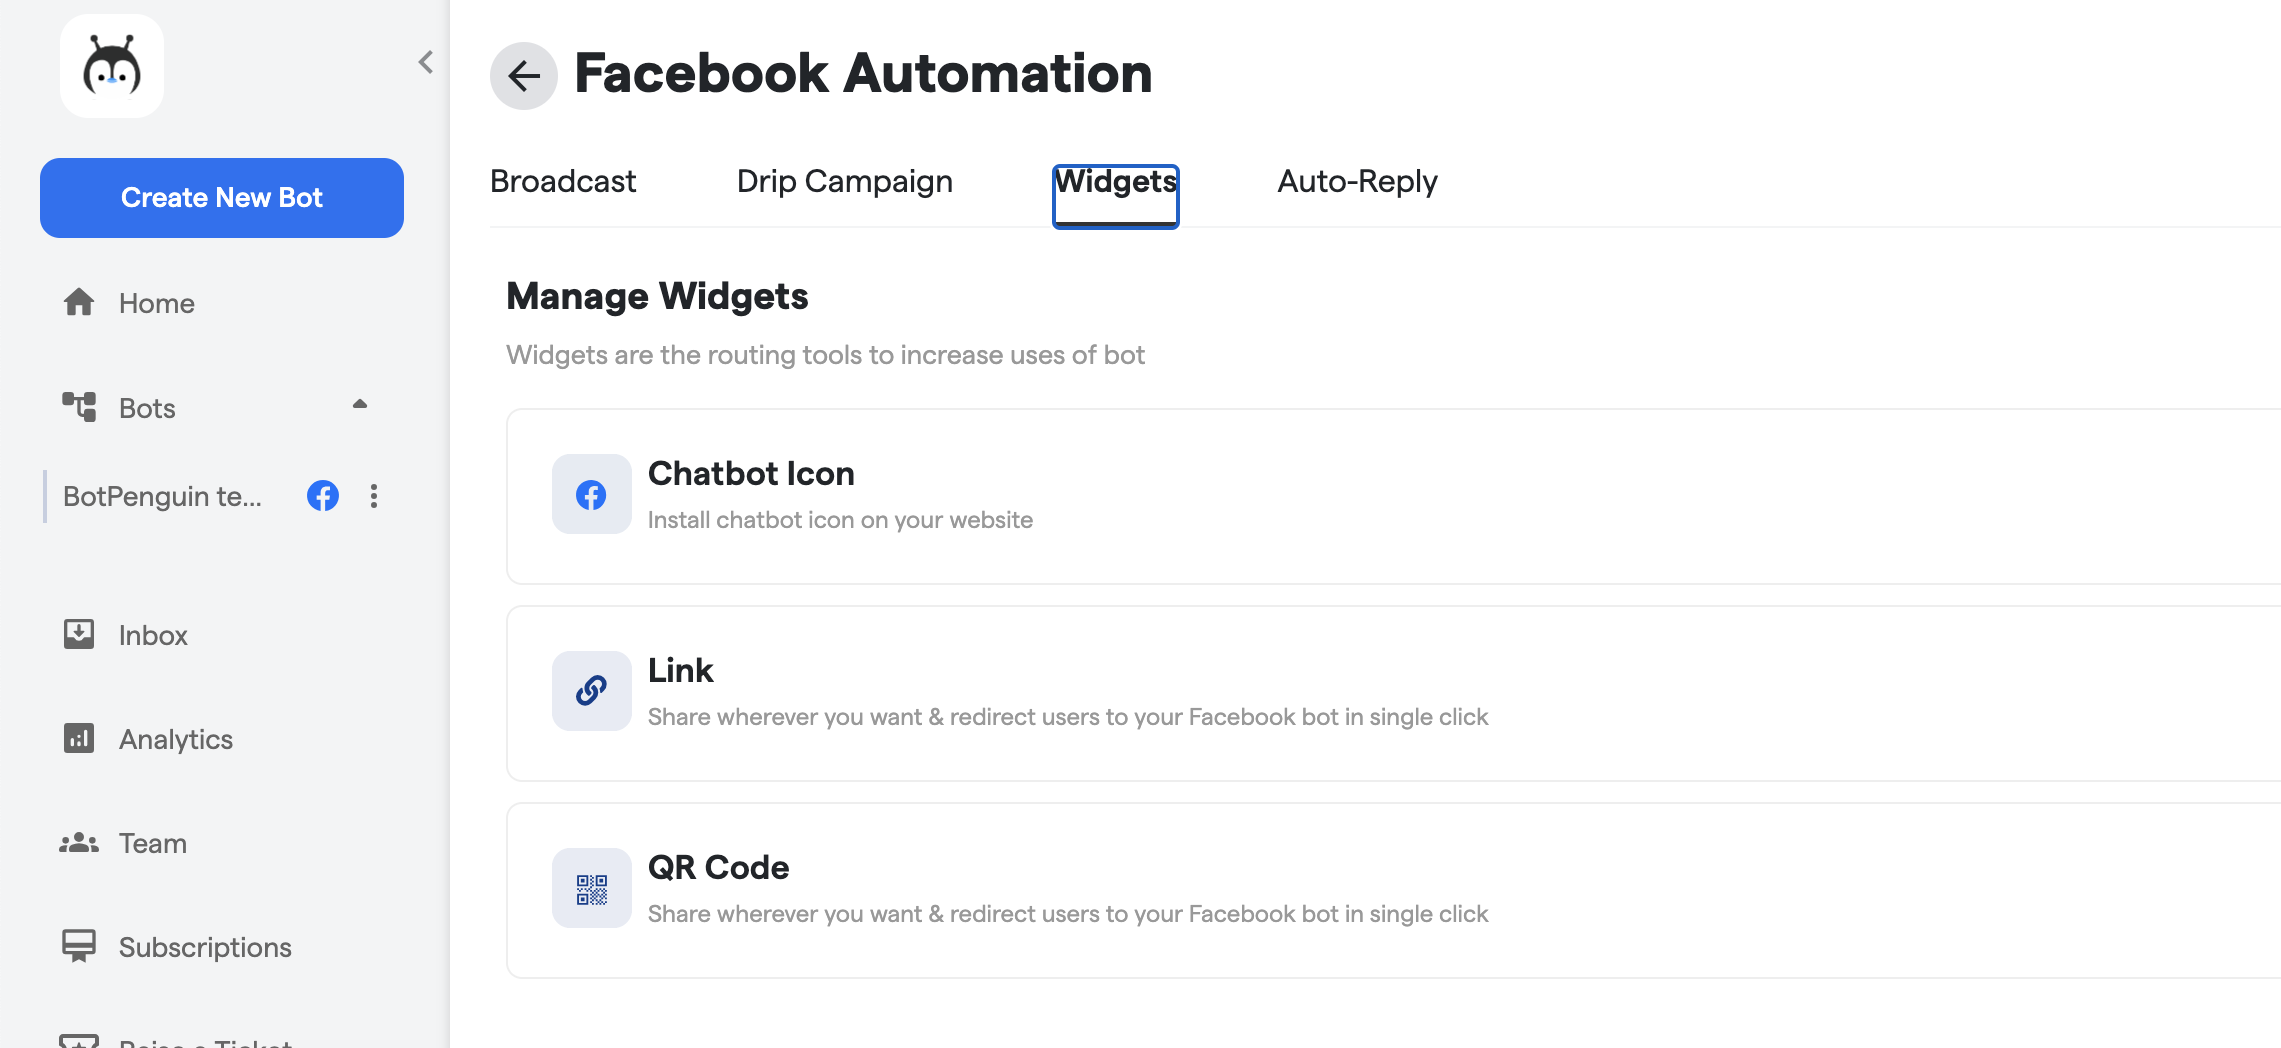 Setting up Facebook Chatbot Automation in BotPenguin